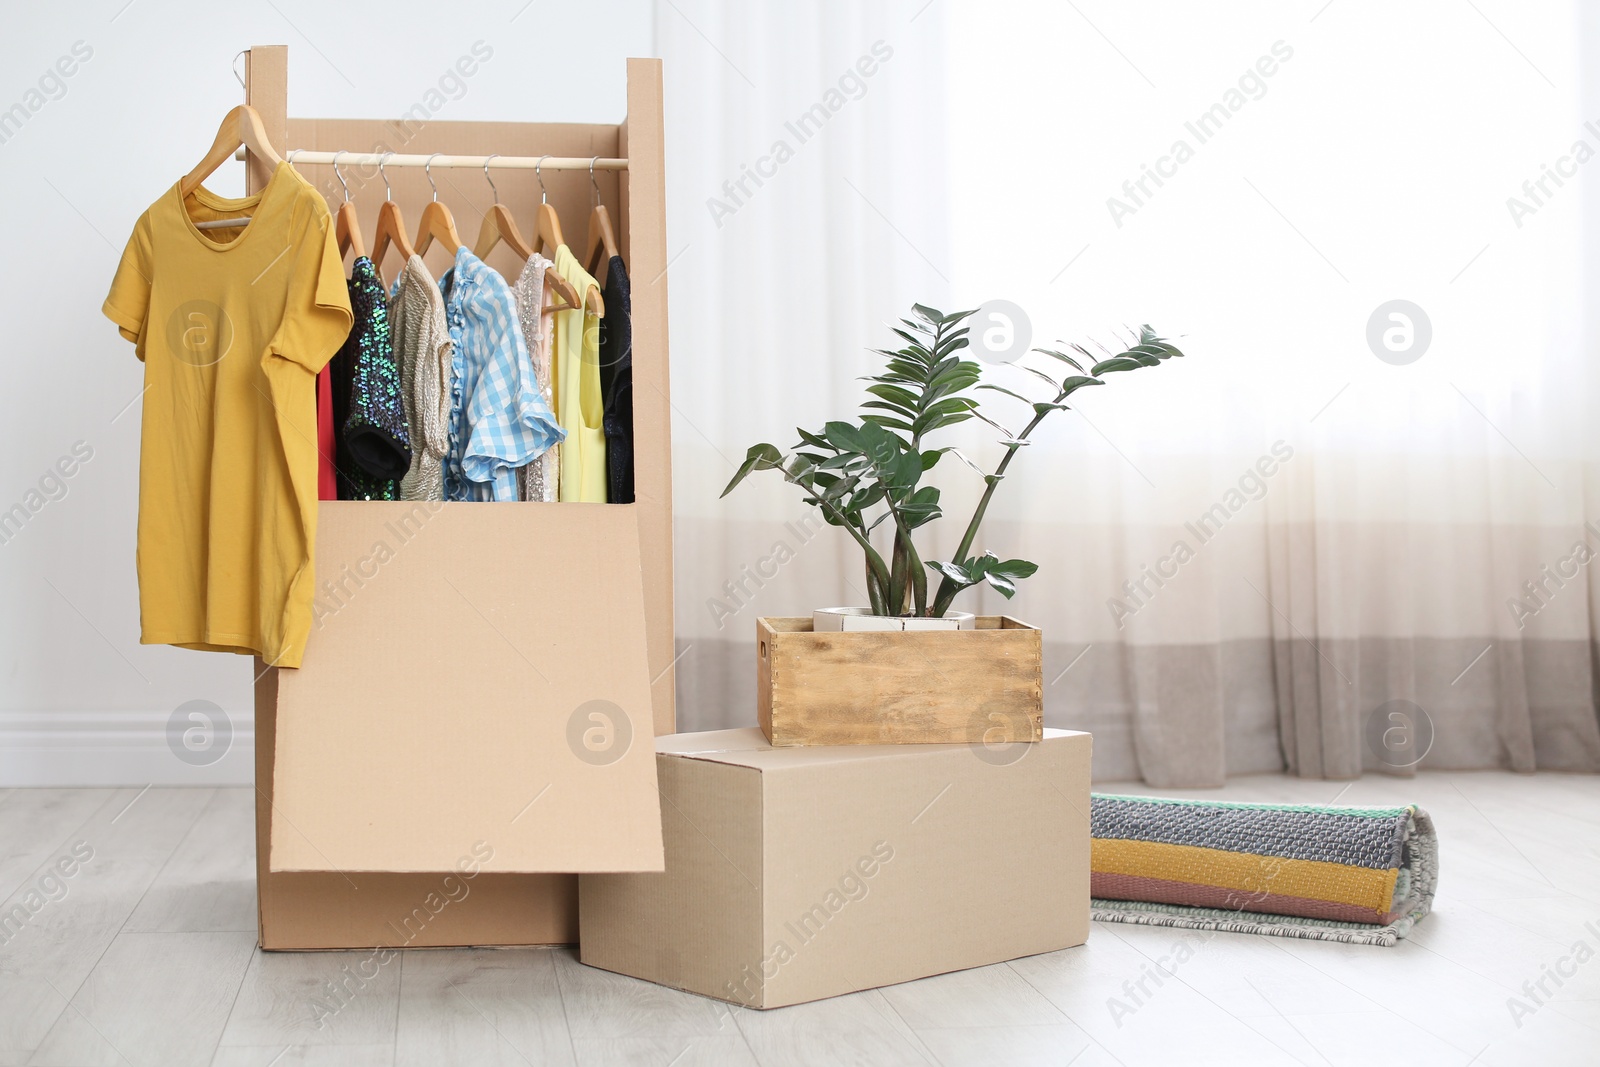 Photo of Cardboard wardrobe box with clothes on hangers, houseplant and carpet indoors. Moving day